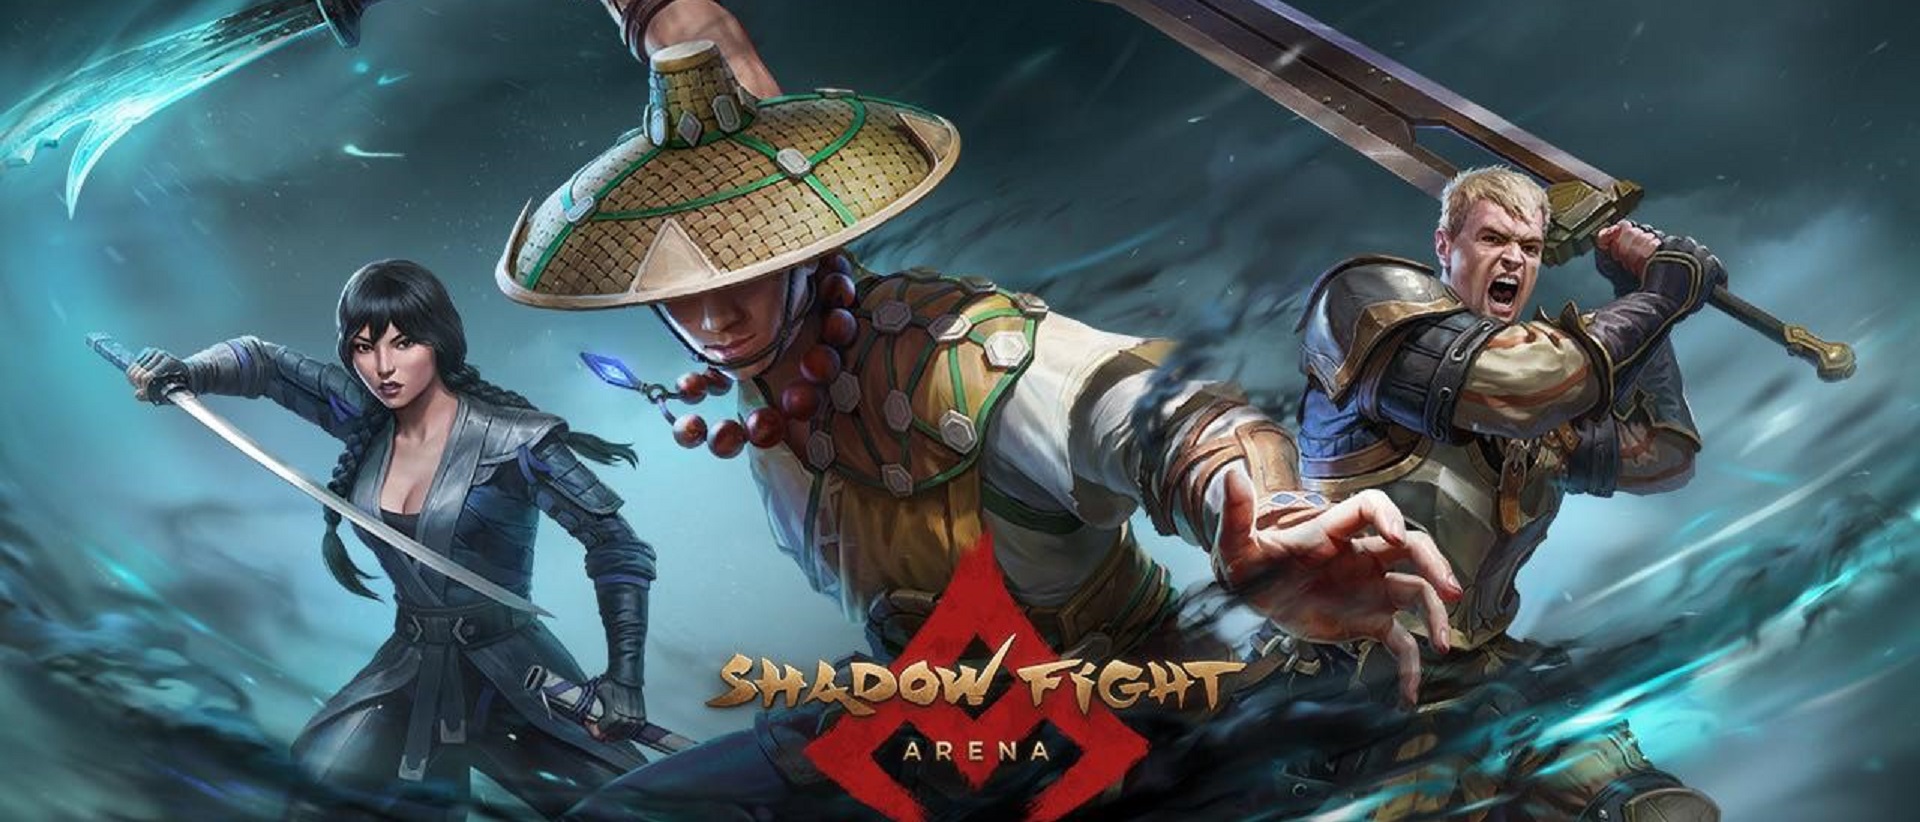 shadow fight 4 arena download free